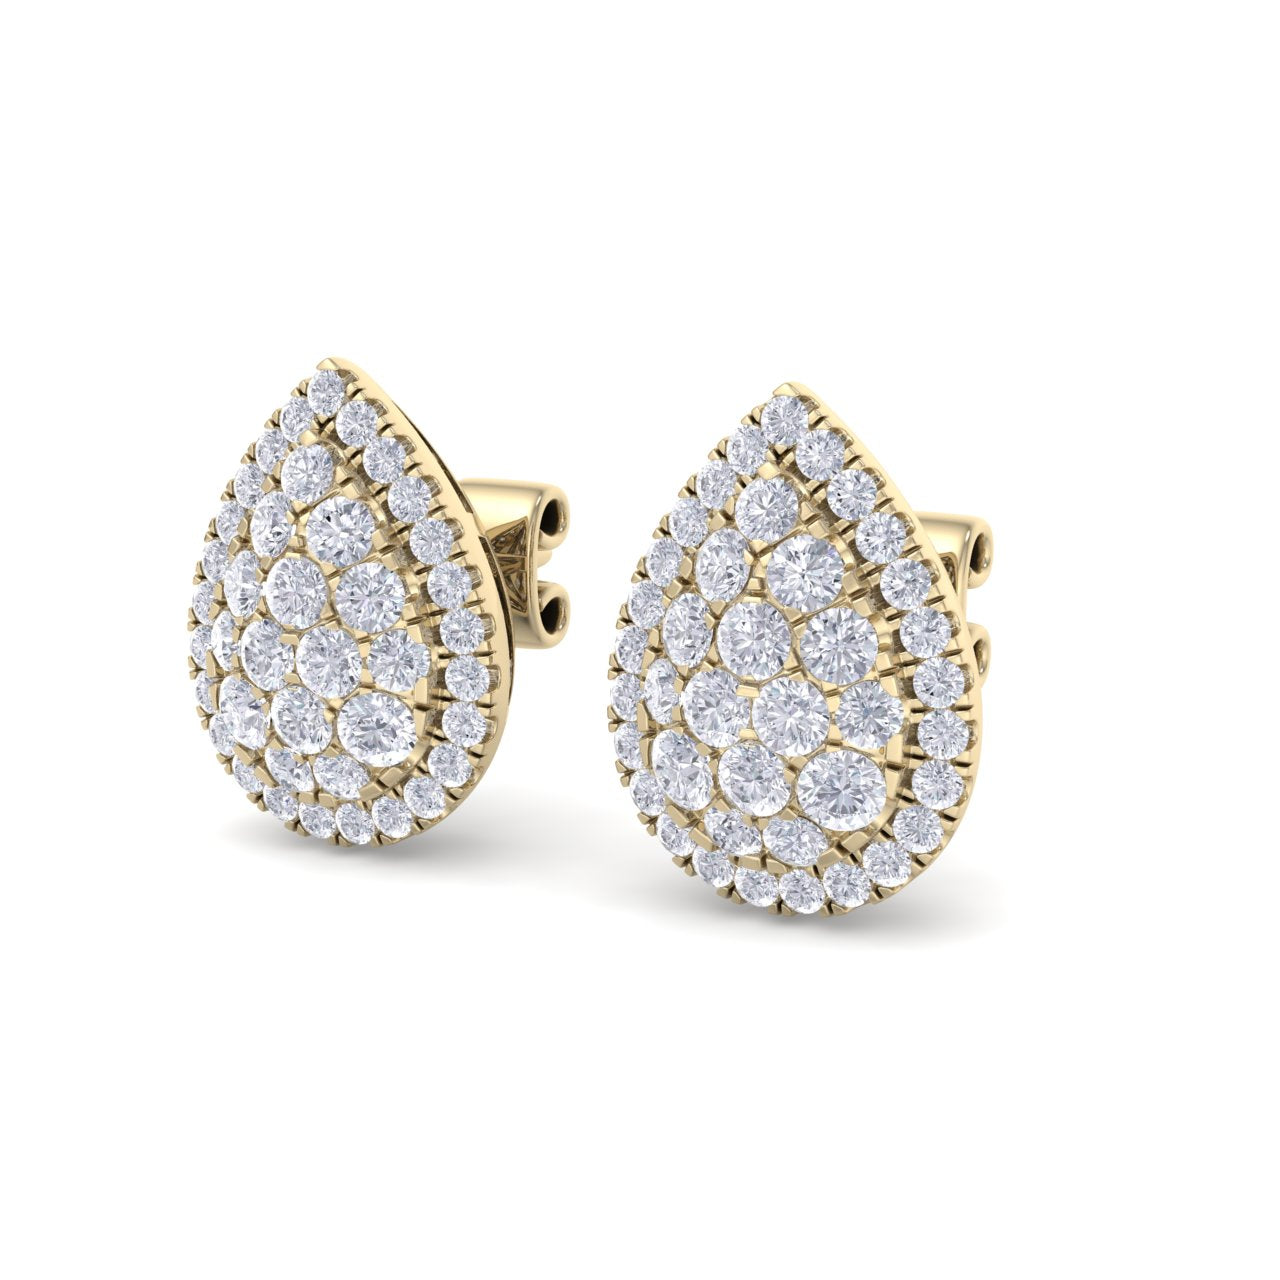 Pear shaped stud earrings in yellow gold with white diamonds of 1.01 ct in weight